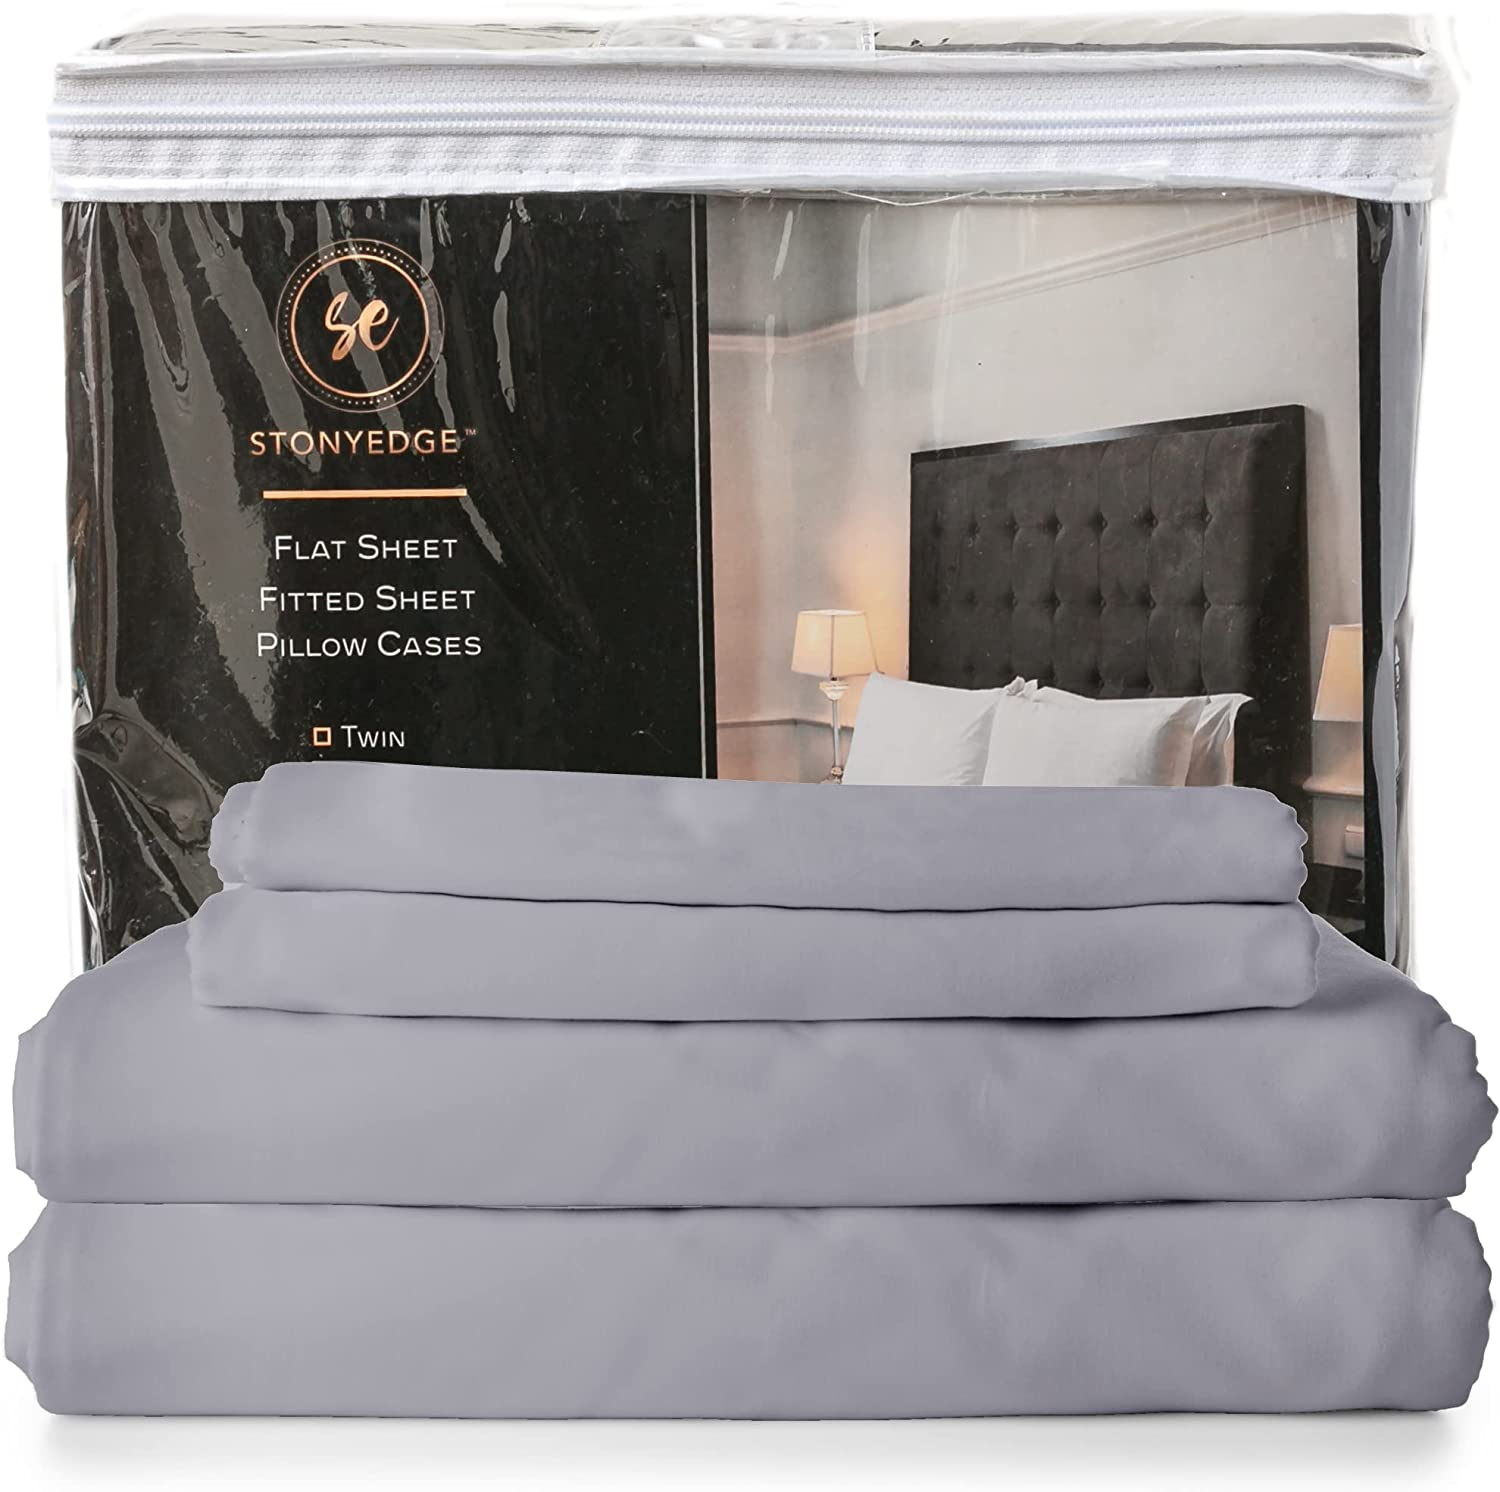 Stony Edge Bed Sheets for All Sized Beds, 300 Thread Count, 100% Cotton, Extra Long Staple Yarns, Set of 4 Sateen Weave Light Gray Bed Sheets & Pillowcases